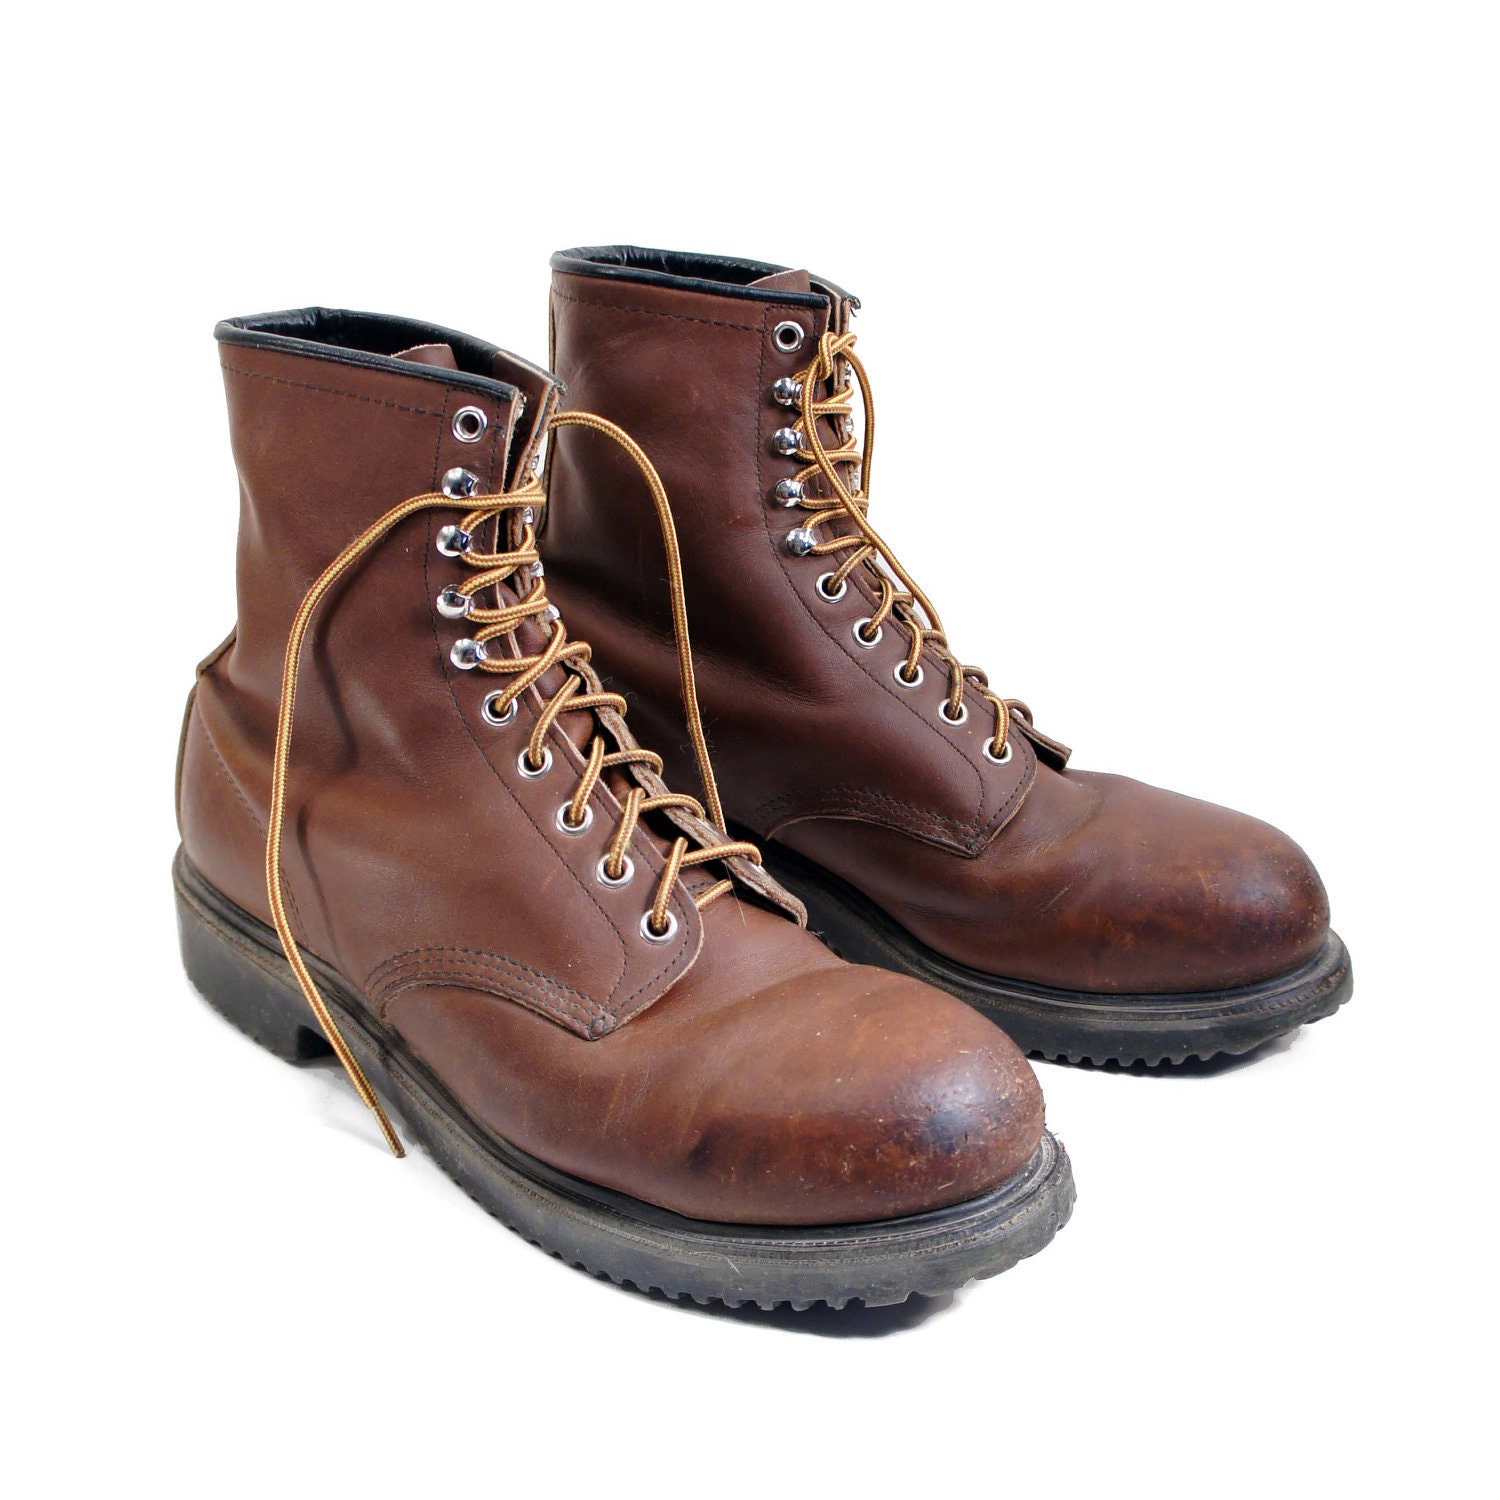 Men's Red Wing Work Boots / Steel Toe Boots in Hiker Style